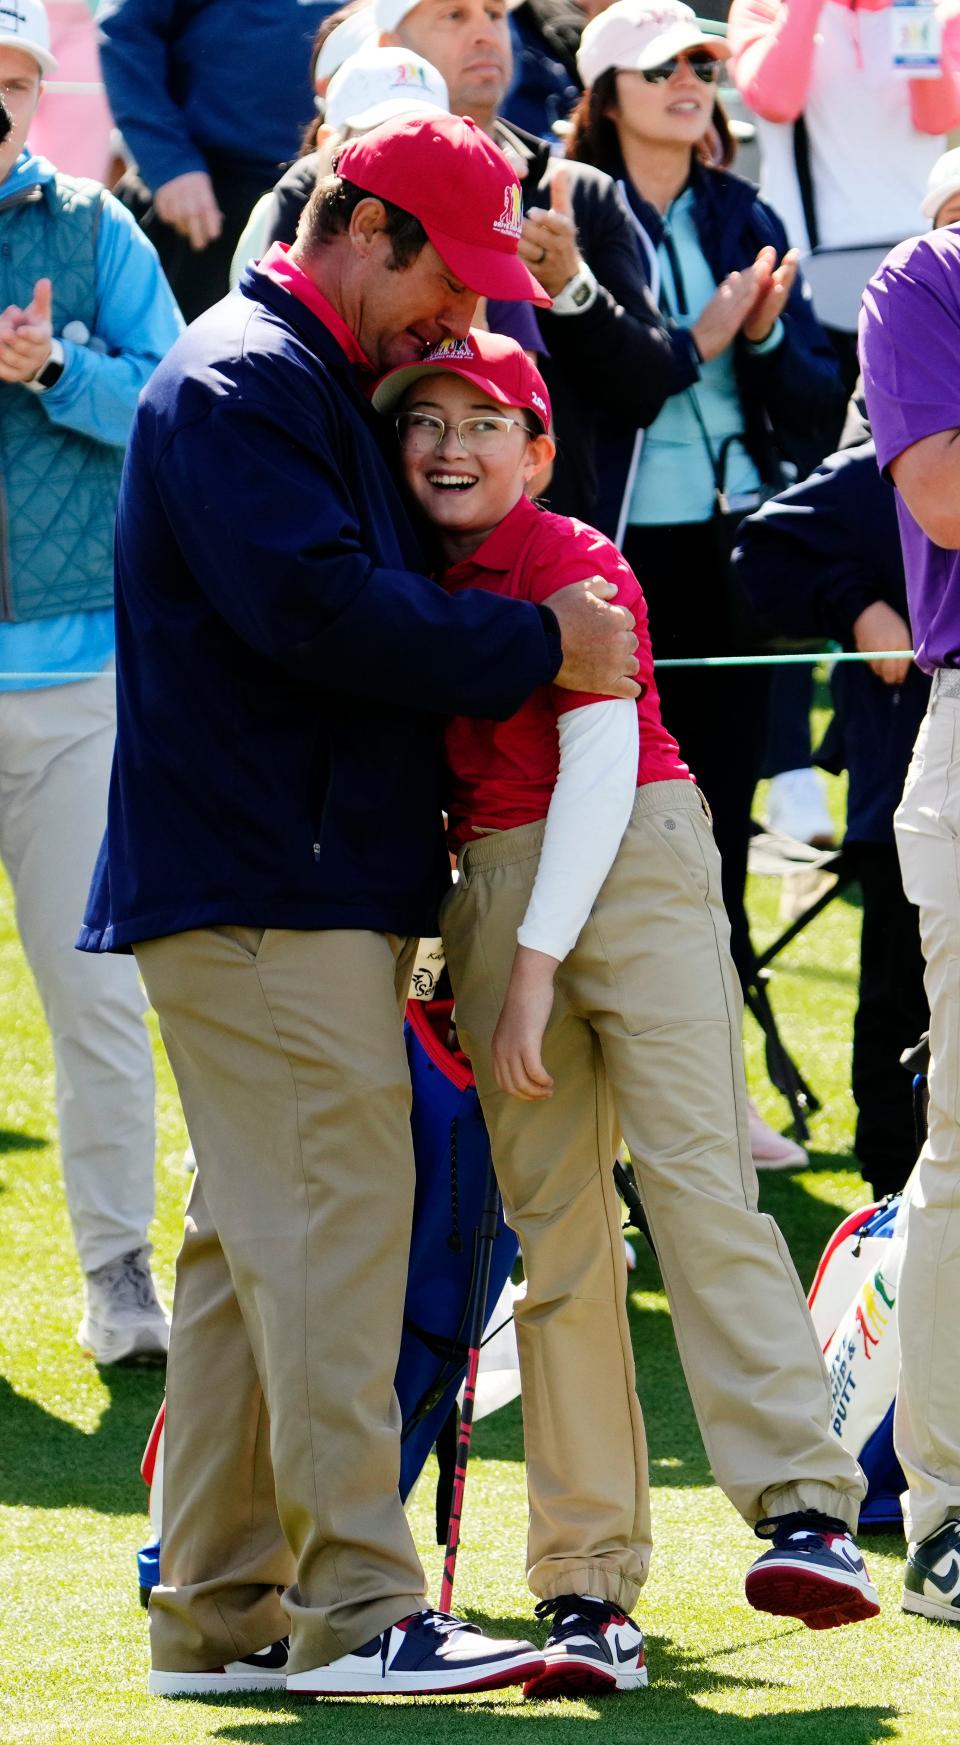 Lily Wachter, from St. Augustine, Fla., gets a congratulatory hug after becoming the overall winner in the girls 10-11 age group during the Drive, Chip & Putt National Finals competition at Augusta National Golf Club.